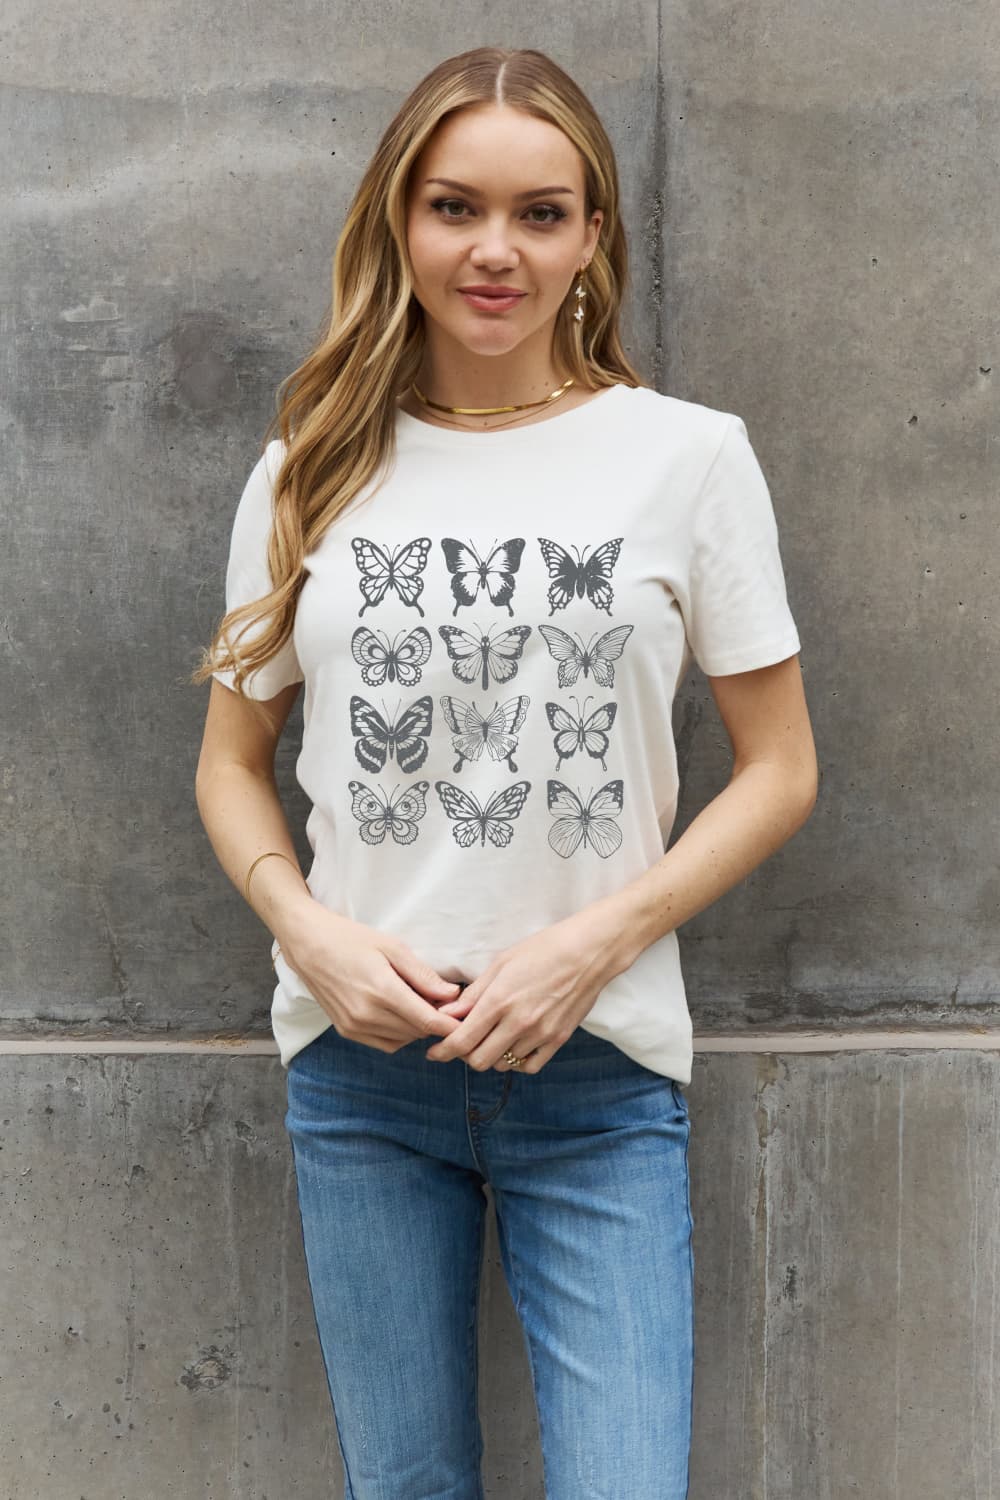 Dim Gray Simply Love Butterfly Graphic Cotton T-Shirt Sentient Beauty Fashions tees